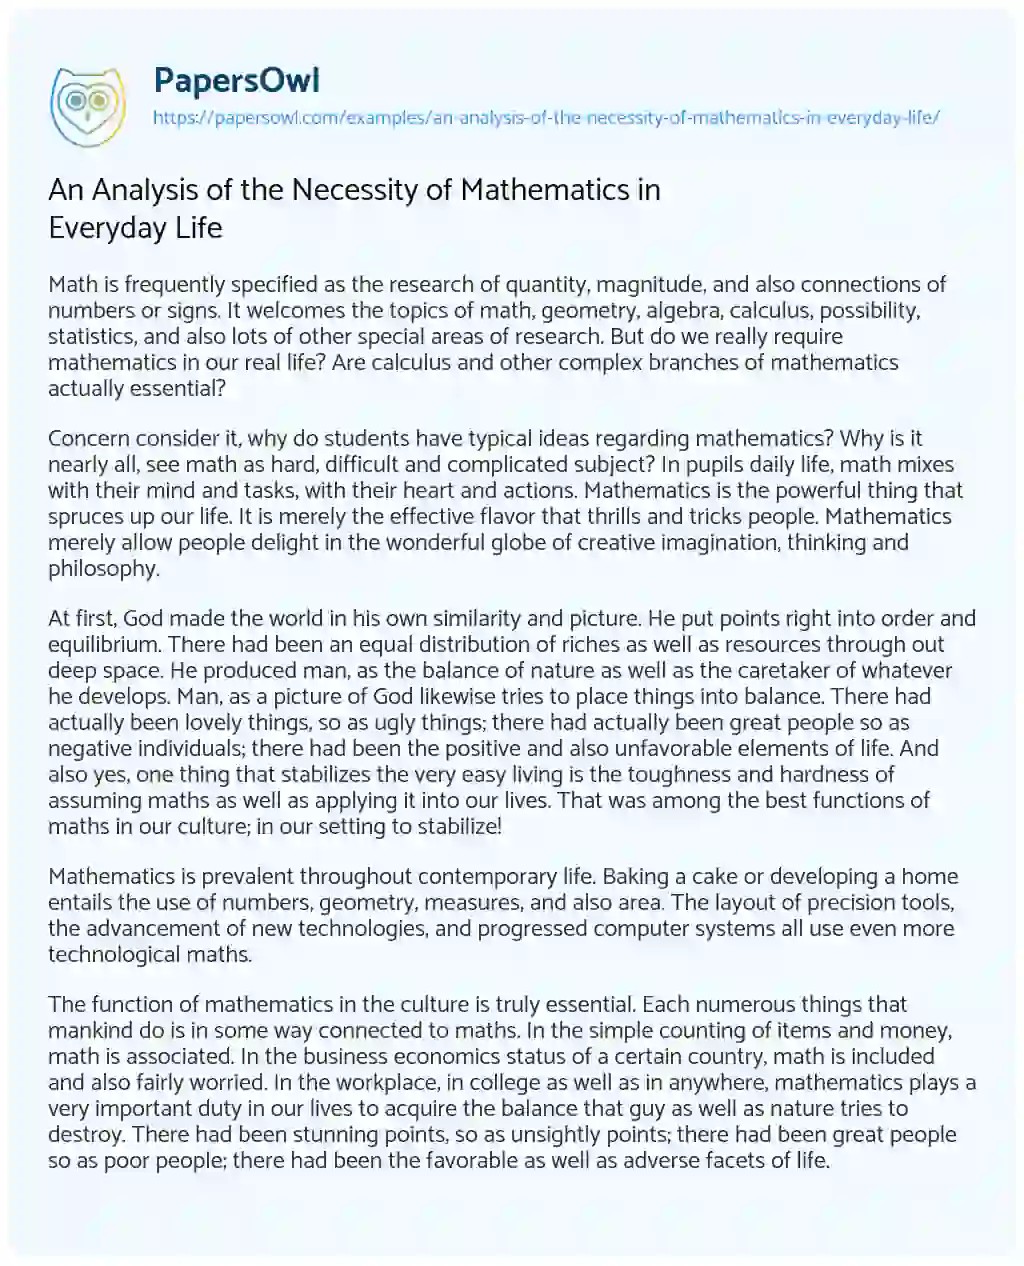 Essay on An Analysis of the Necessity of Mathematics in Everyday Life